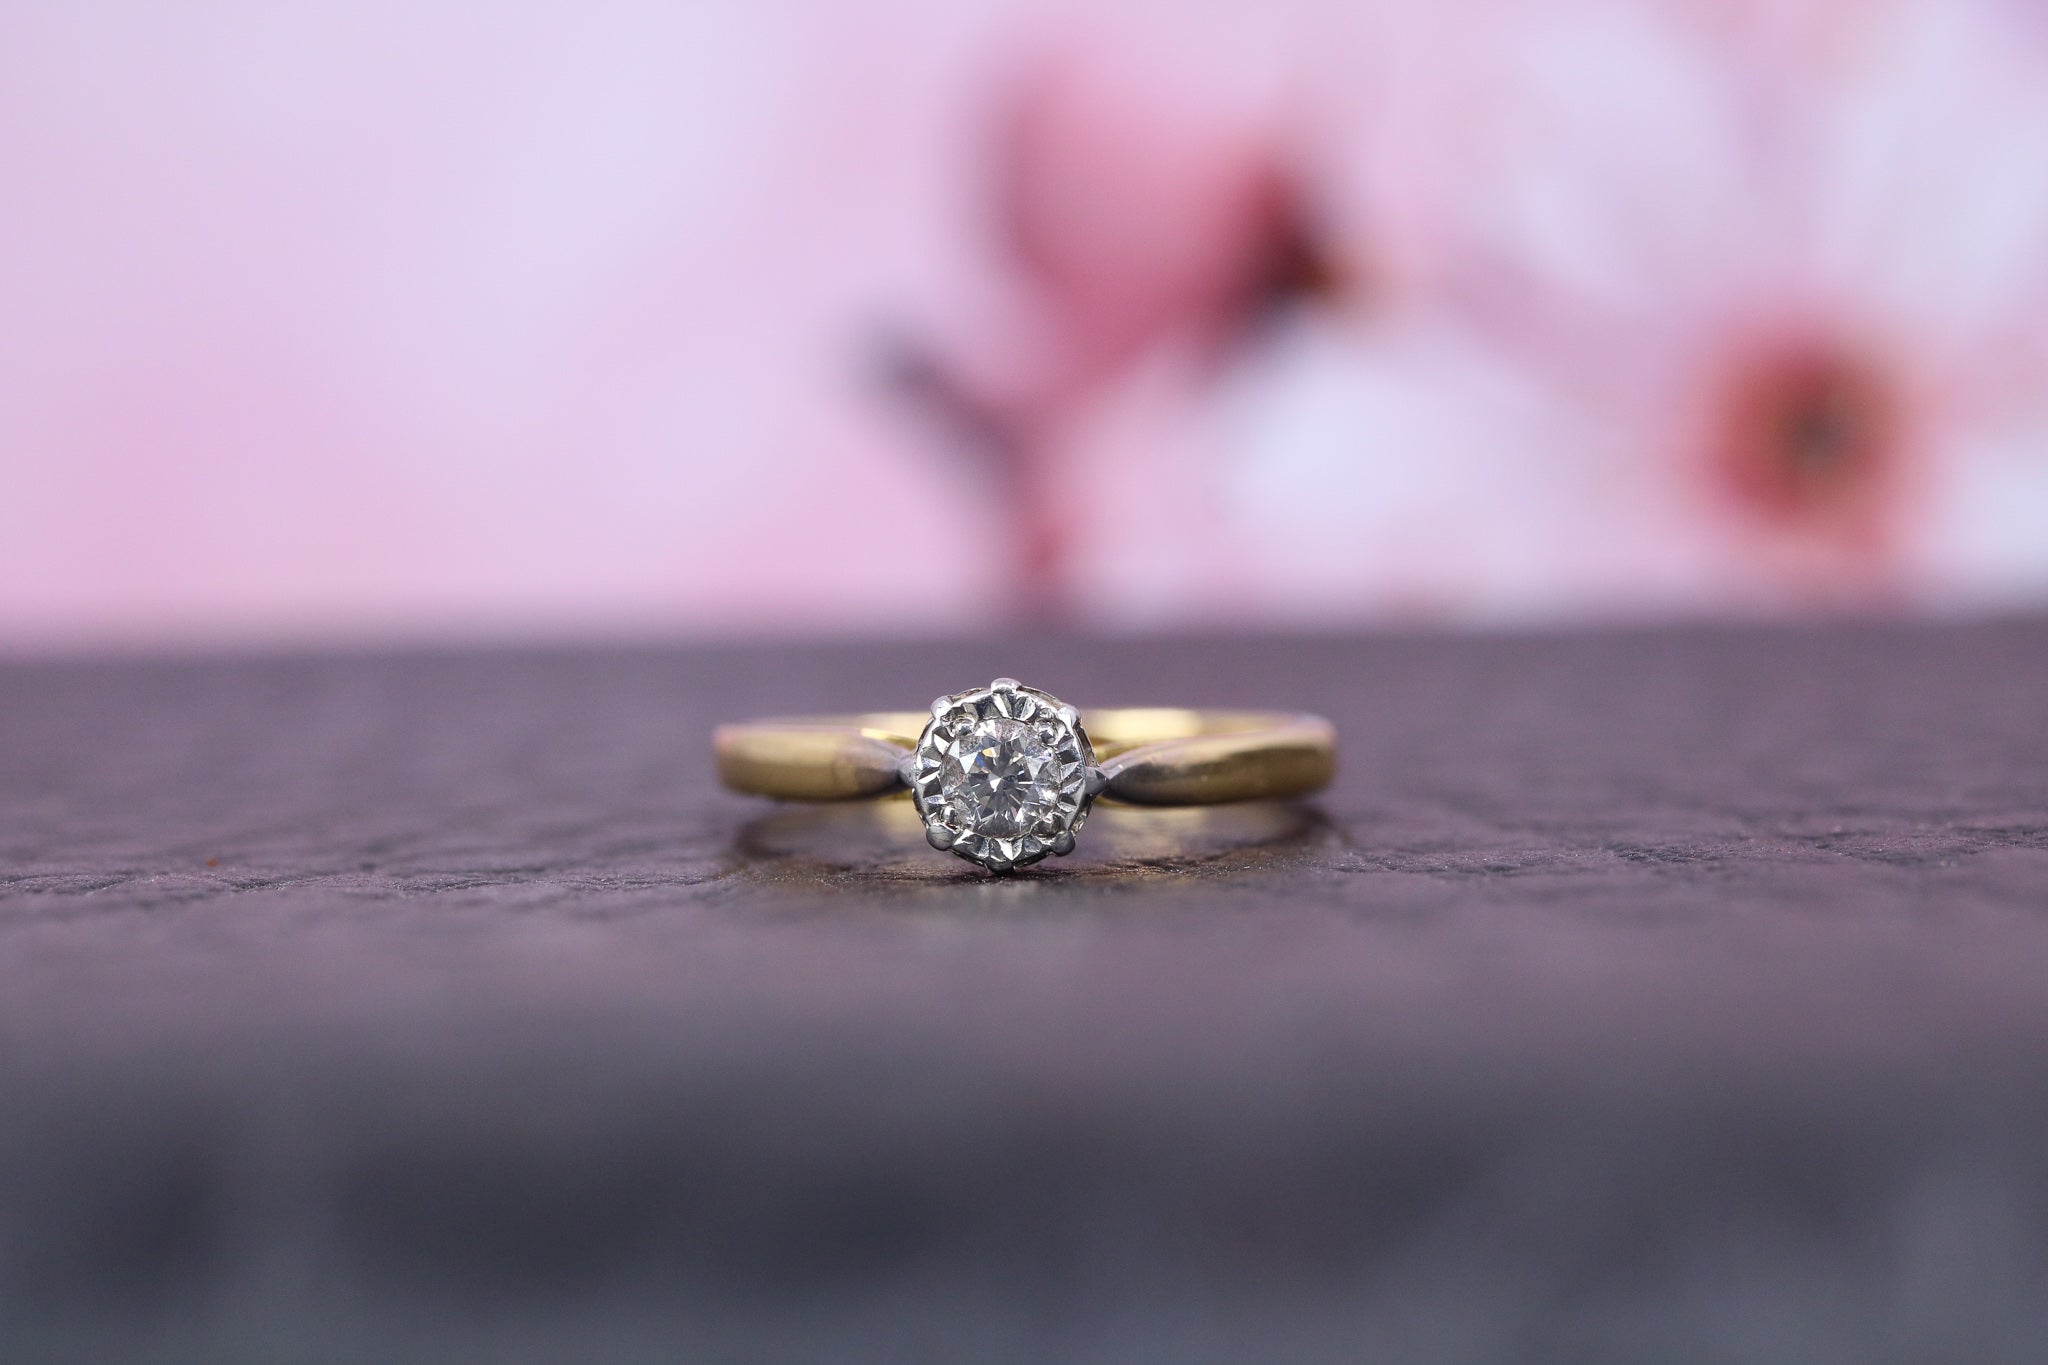 18ct Yellow Gold & Diamond Ring - W6033 - Hallmark Jewellers Formby & The Jewellers Bench Widnes